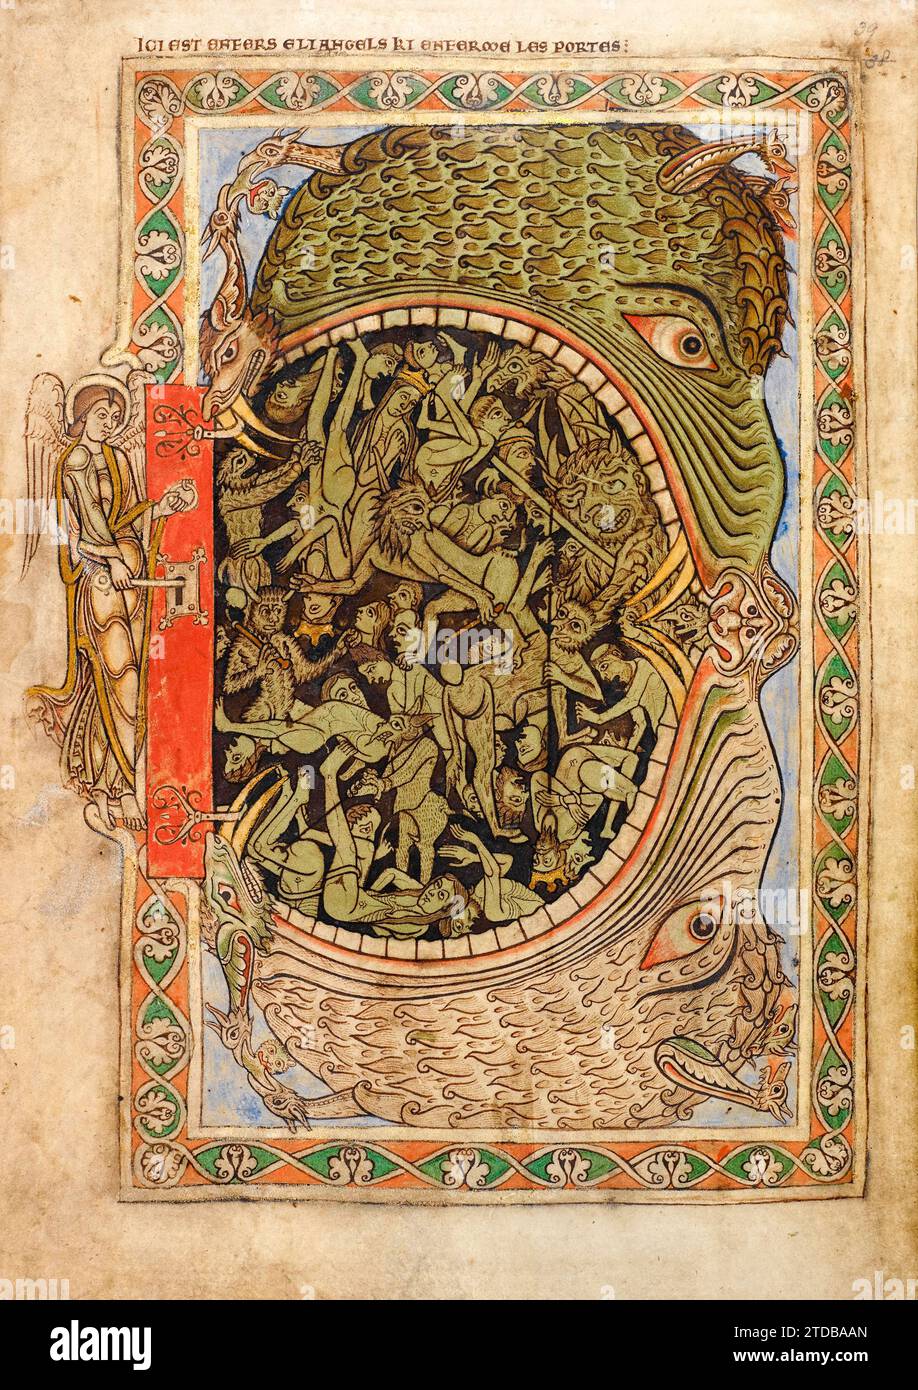 Hellmouth / Gates of Hell / Jaws of Hell from the 12th century illuminated manuscript Winchester Psalter showing the open mouth of a vast monster representing the gates of hell being locked by Archangel Michael. Stock Photo